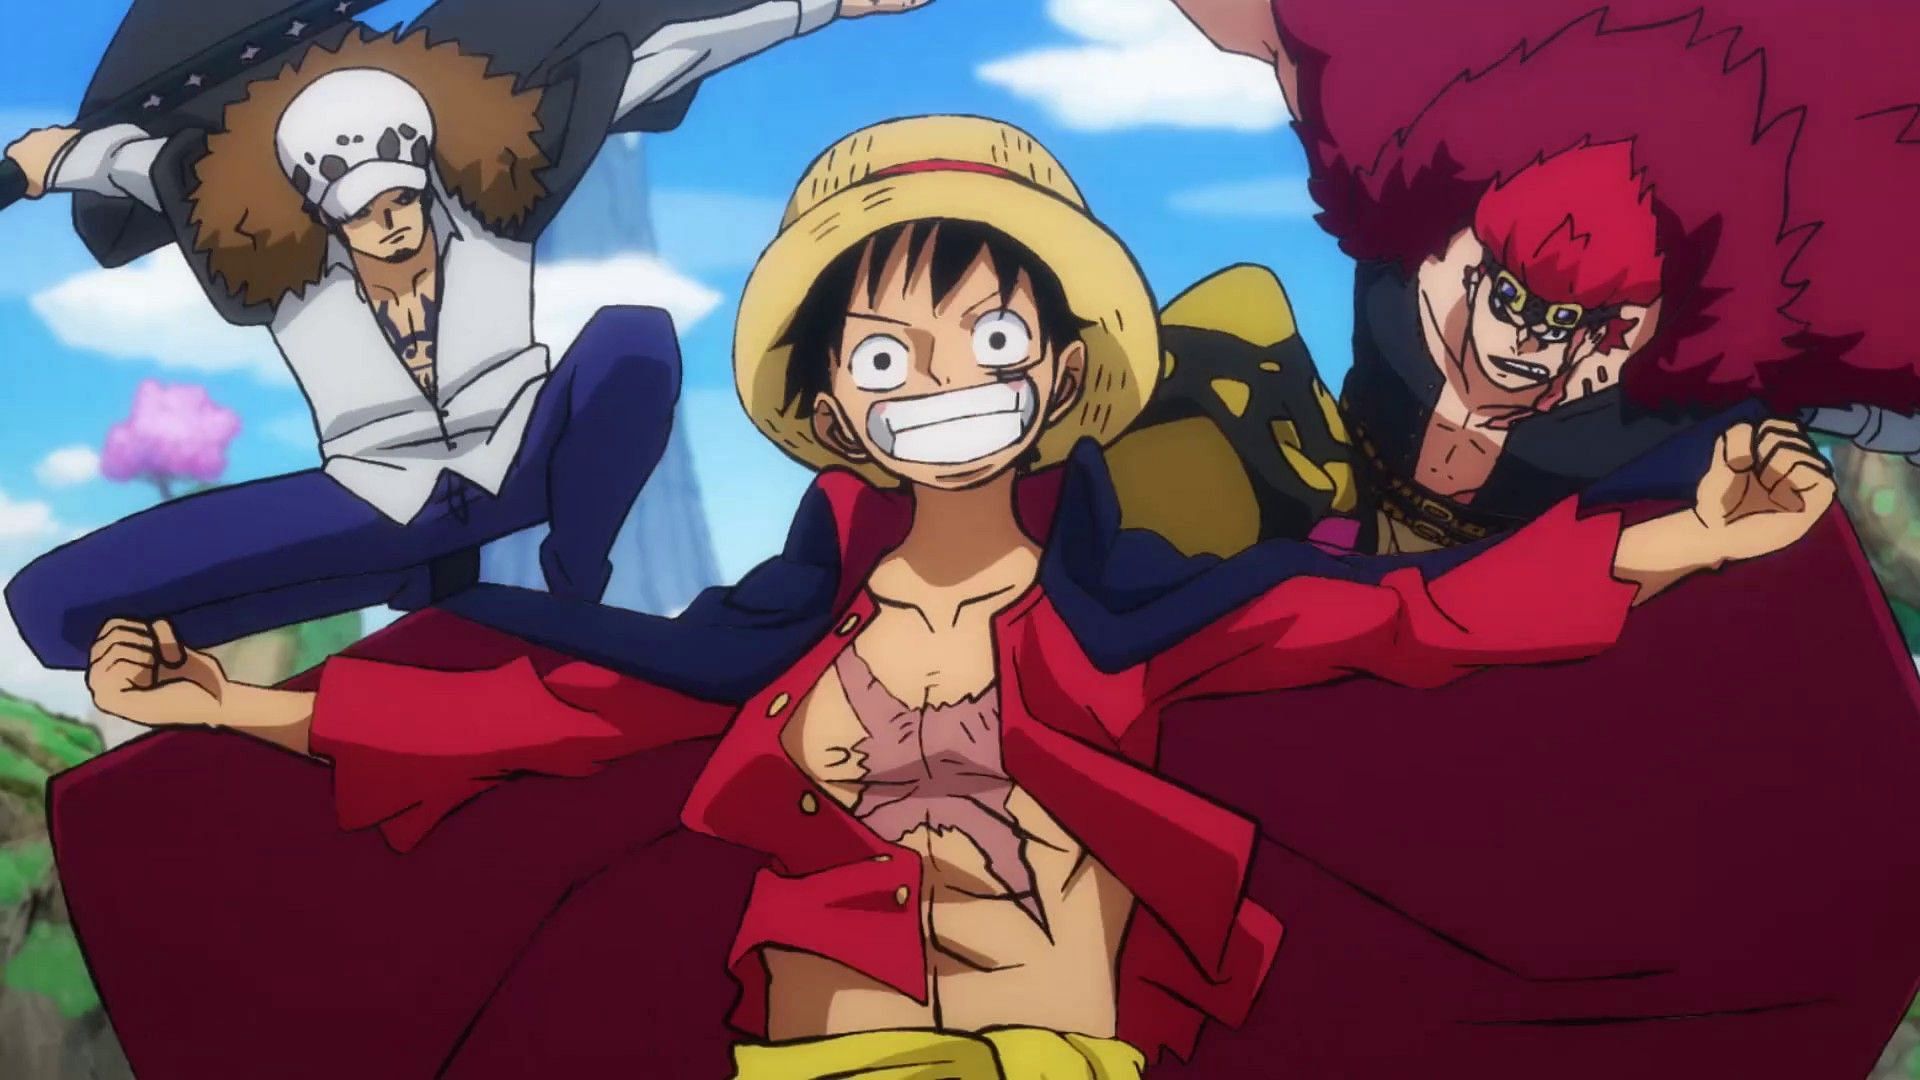 One Piece Episode 1016: Roof Piece continues, the three captains